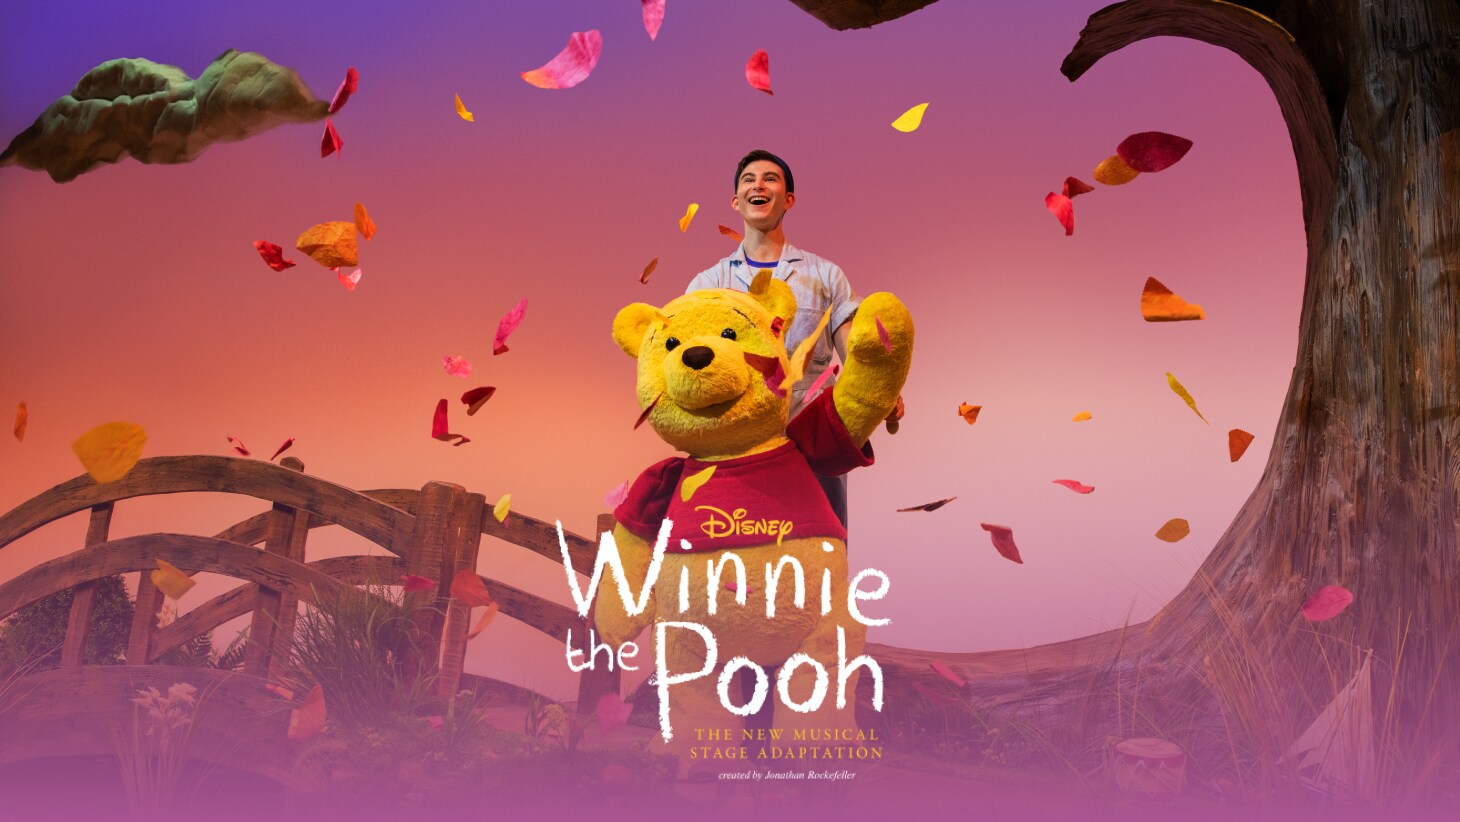 Jake Bazel on Winnie the Pooh: ‘It’s like stepping into the Hundred Acre Wood’